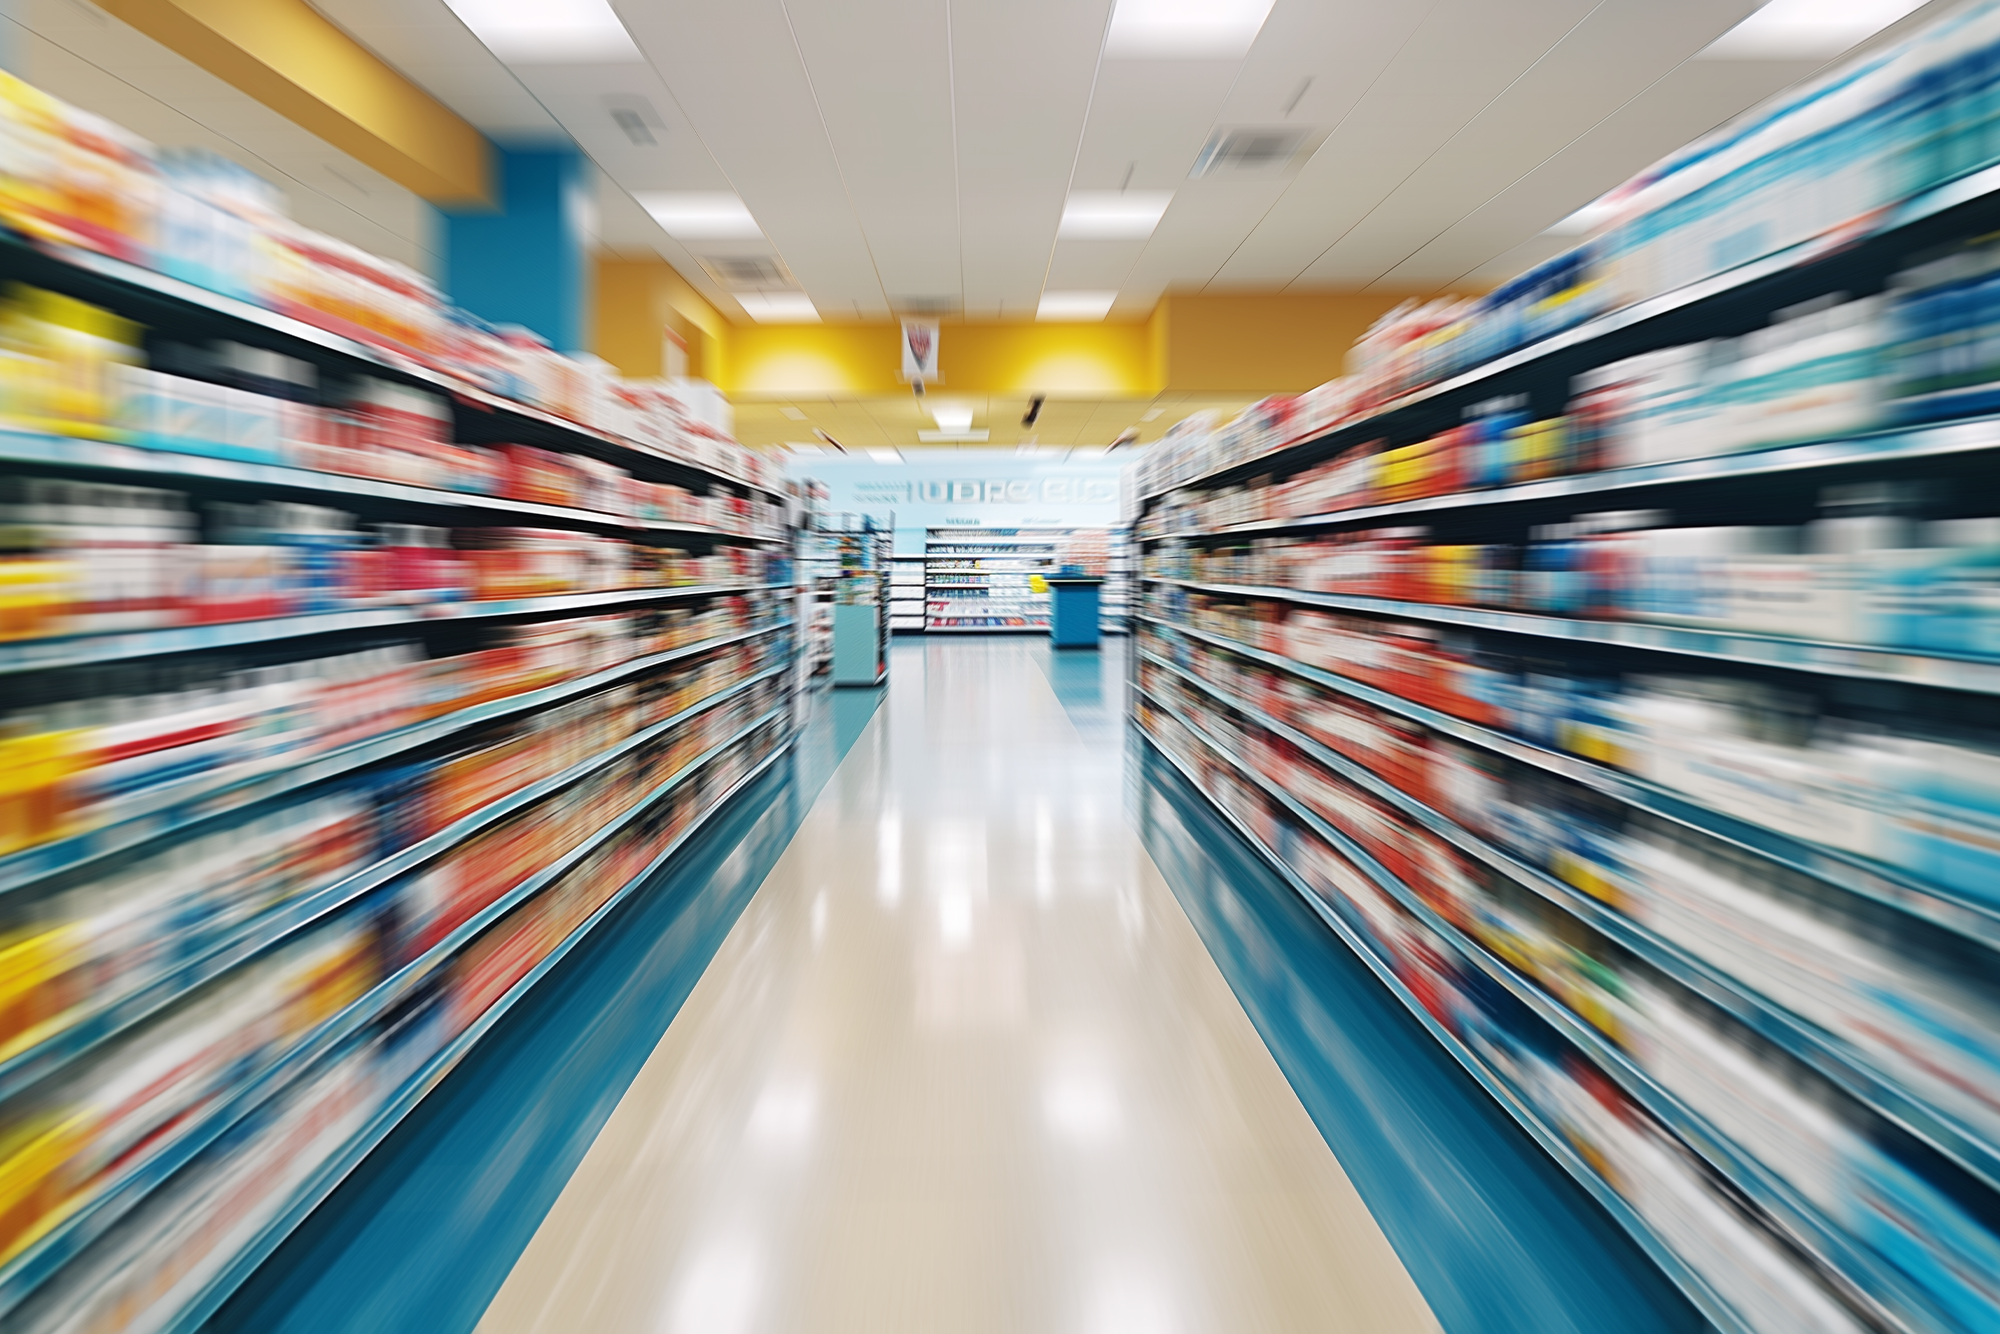 Using HSAs, Health FSAs and HRAs for Over-the-Counter Items: An isle of medicine at a pharmacy.